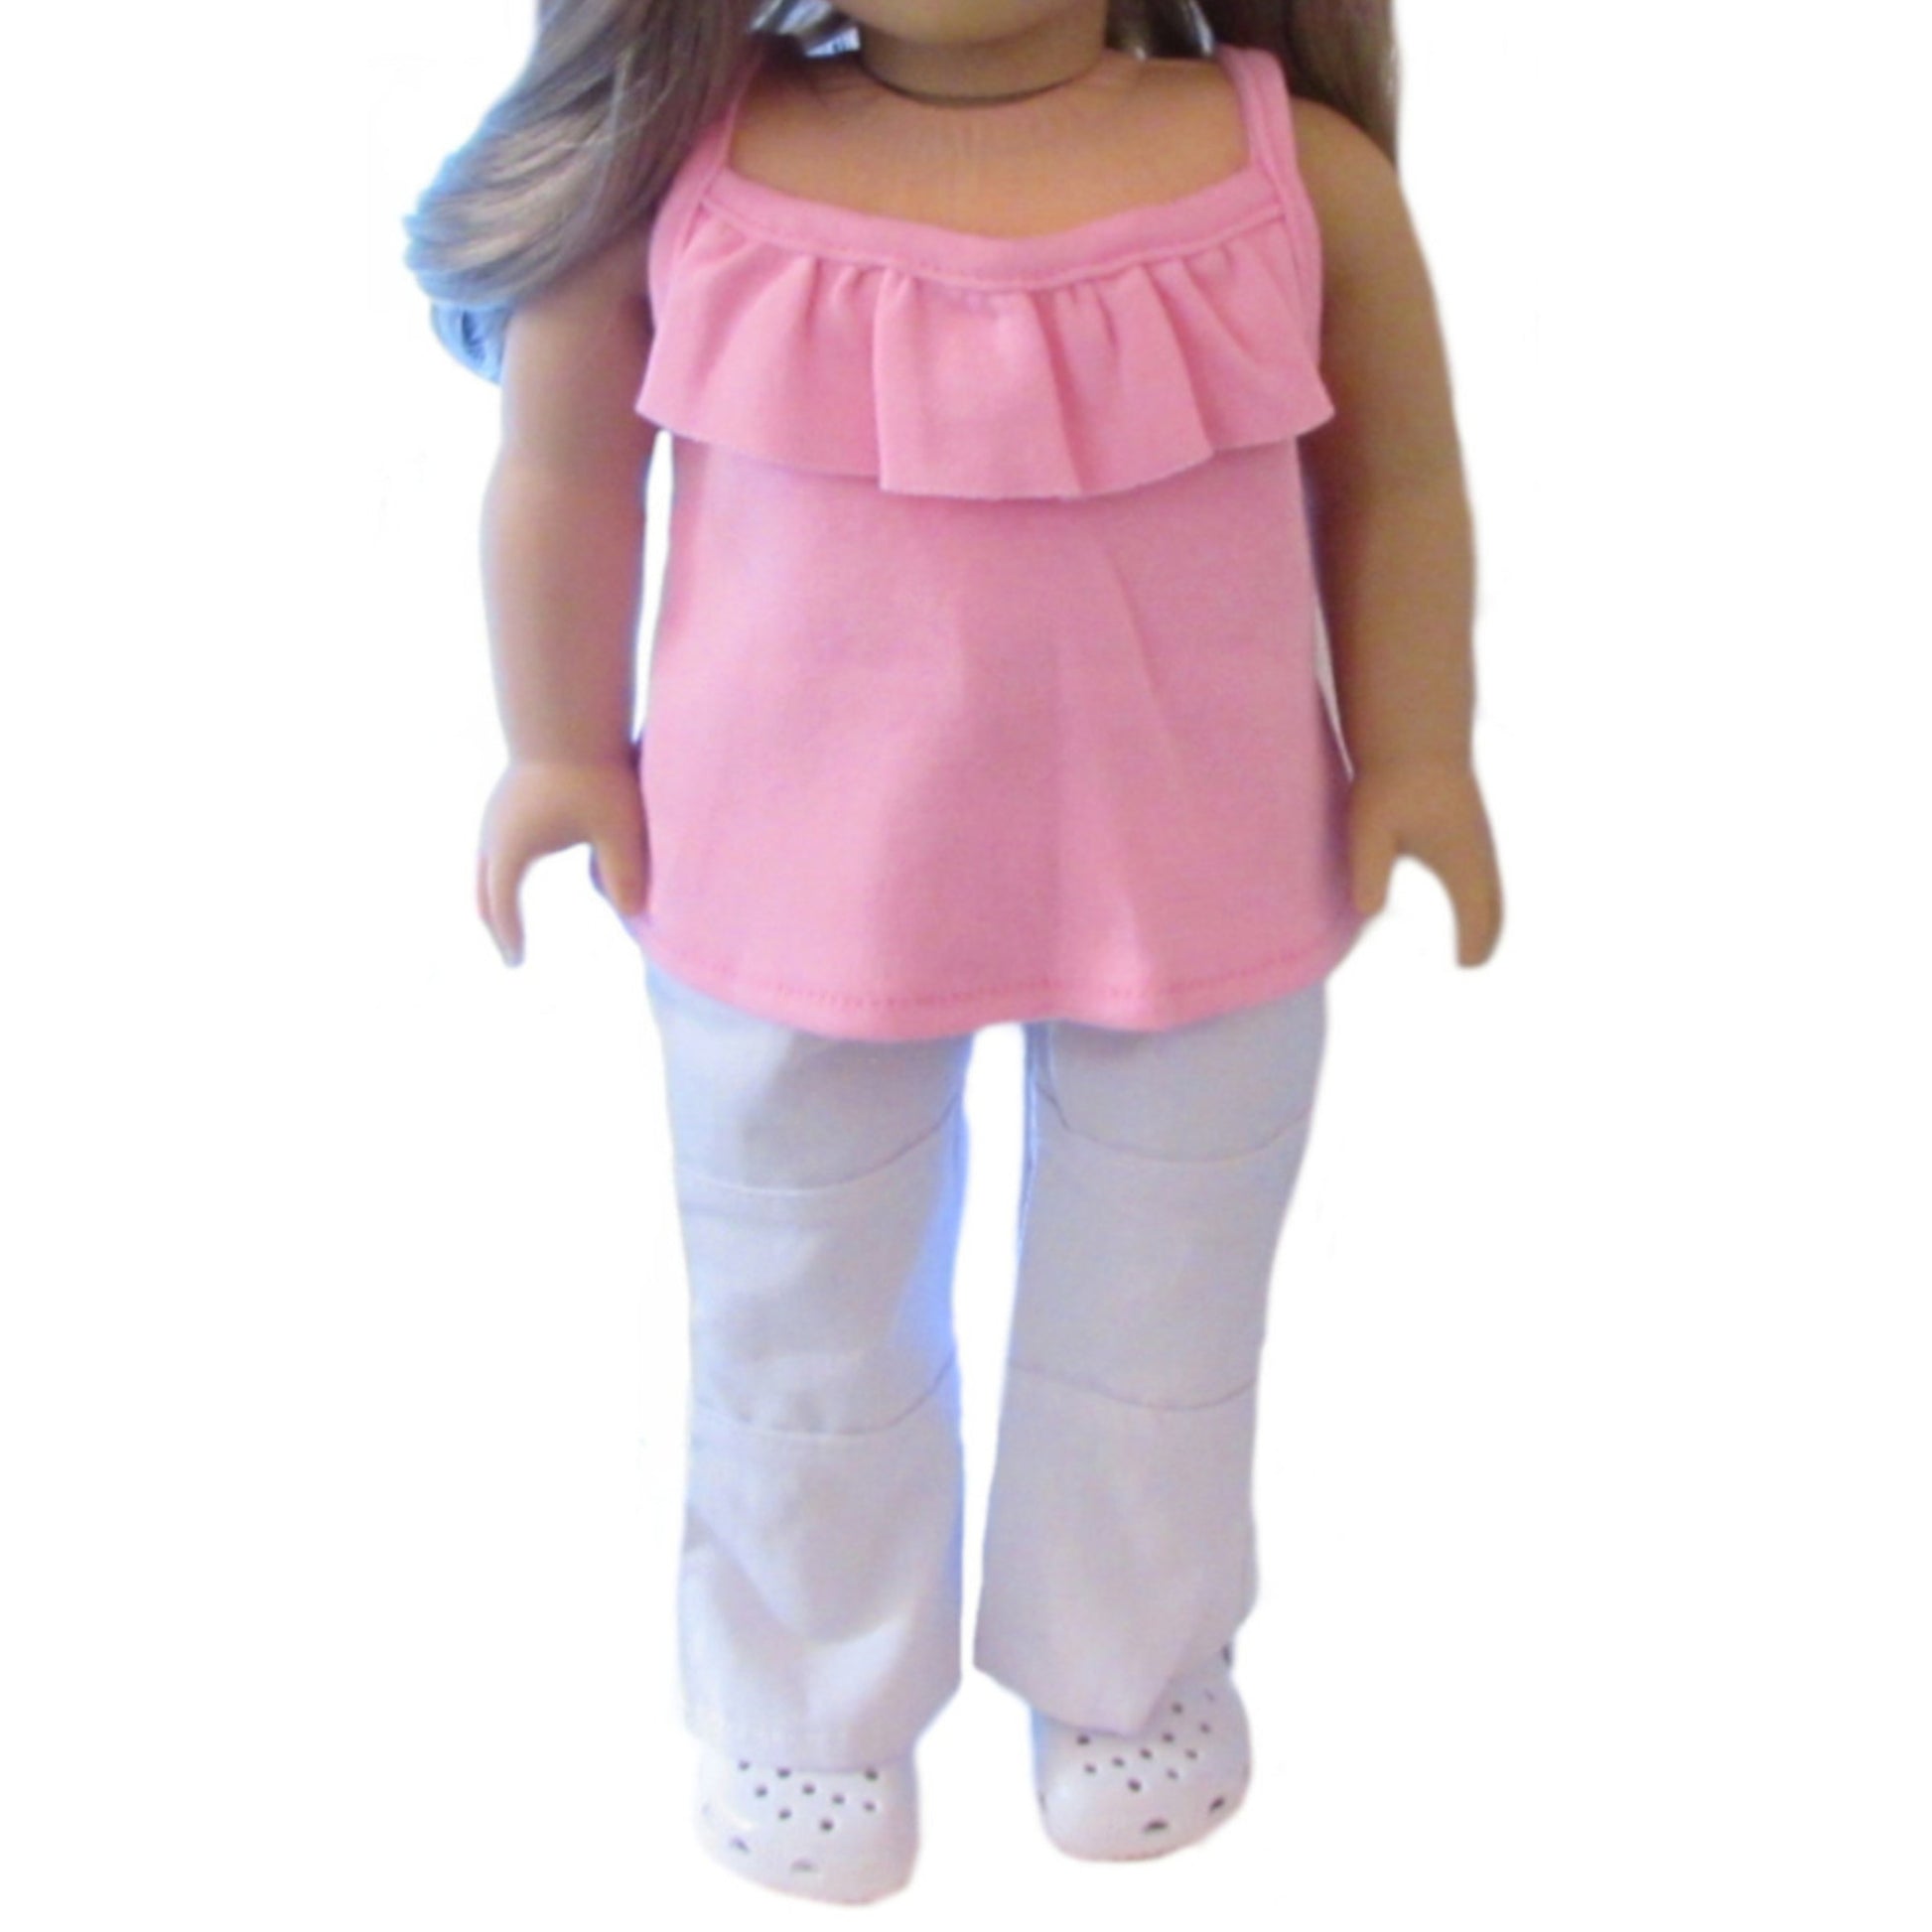 Pink Doll Tank Top and Pants Outfit for 18-inch dolls 